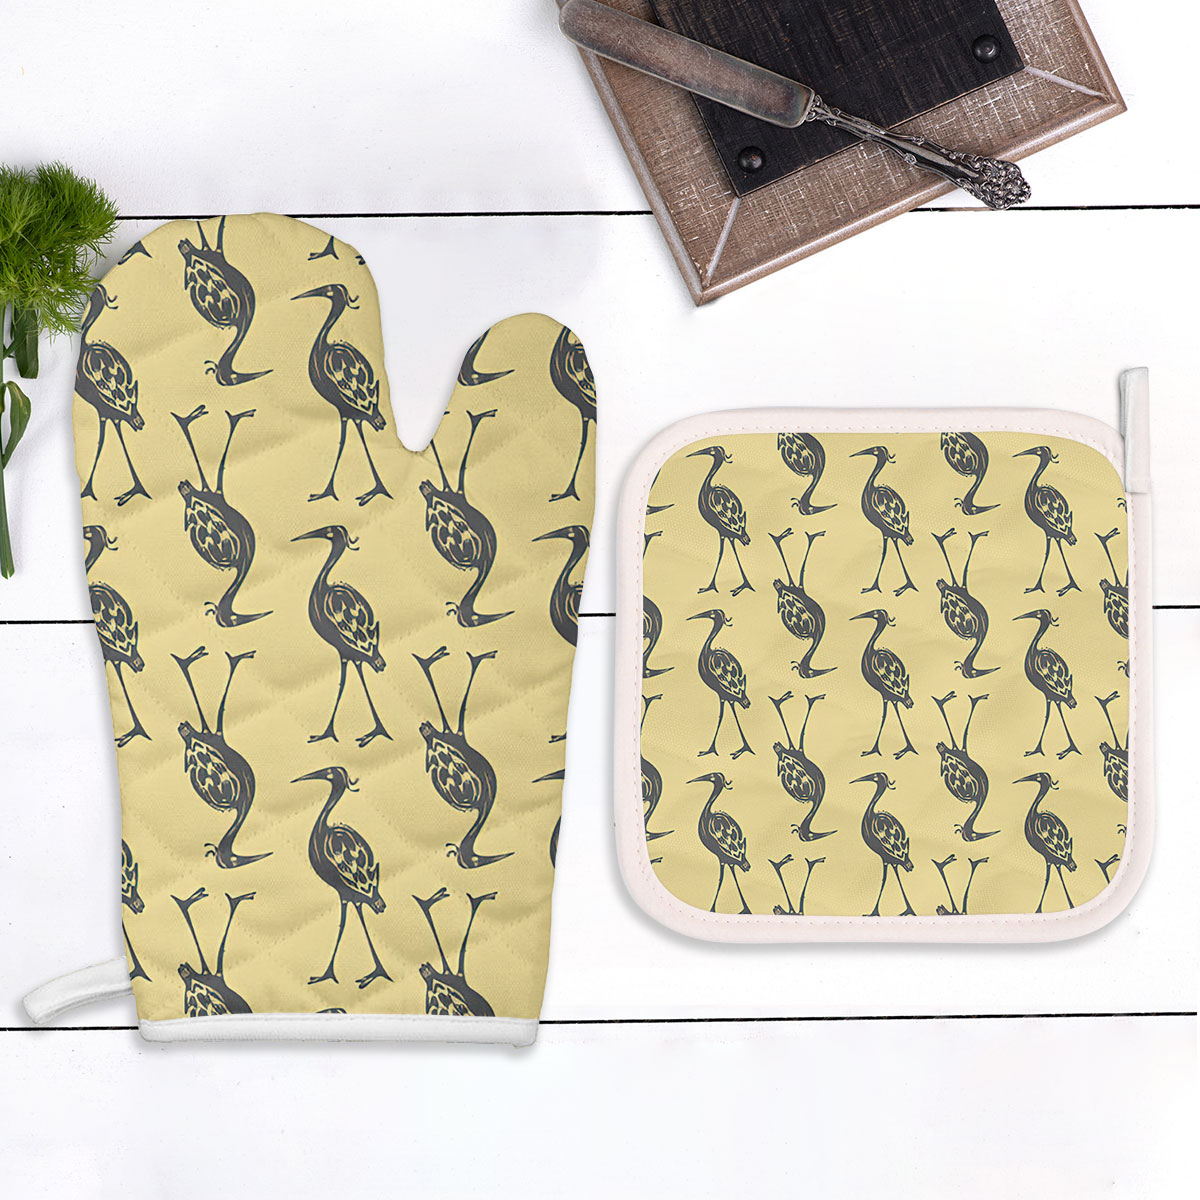 Up And Down Heron Art Oven Mitts Pot Holder Set